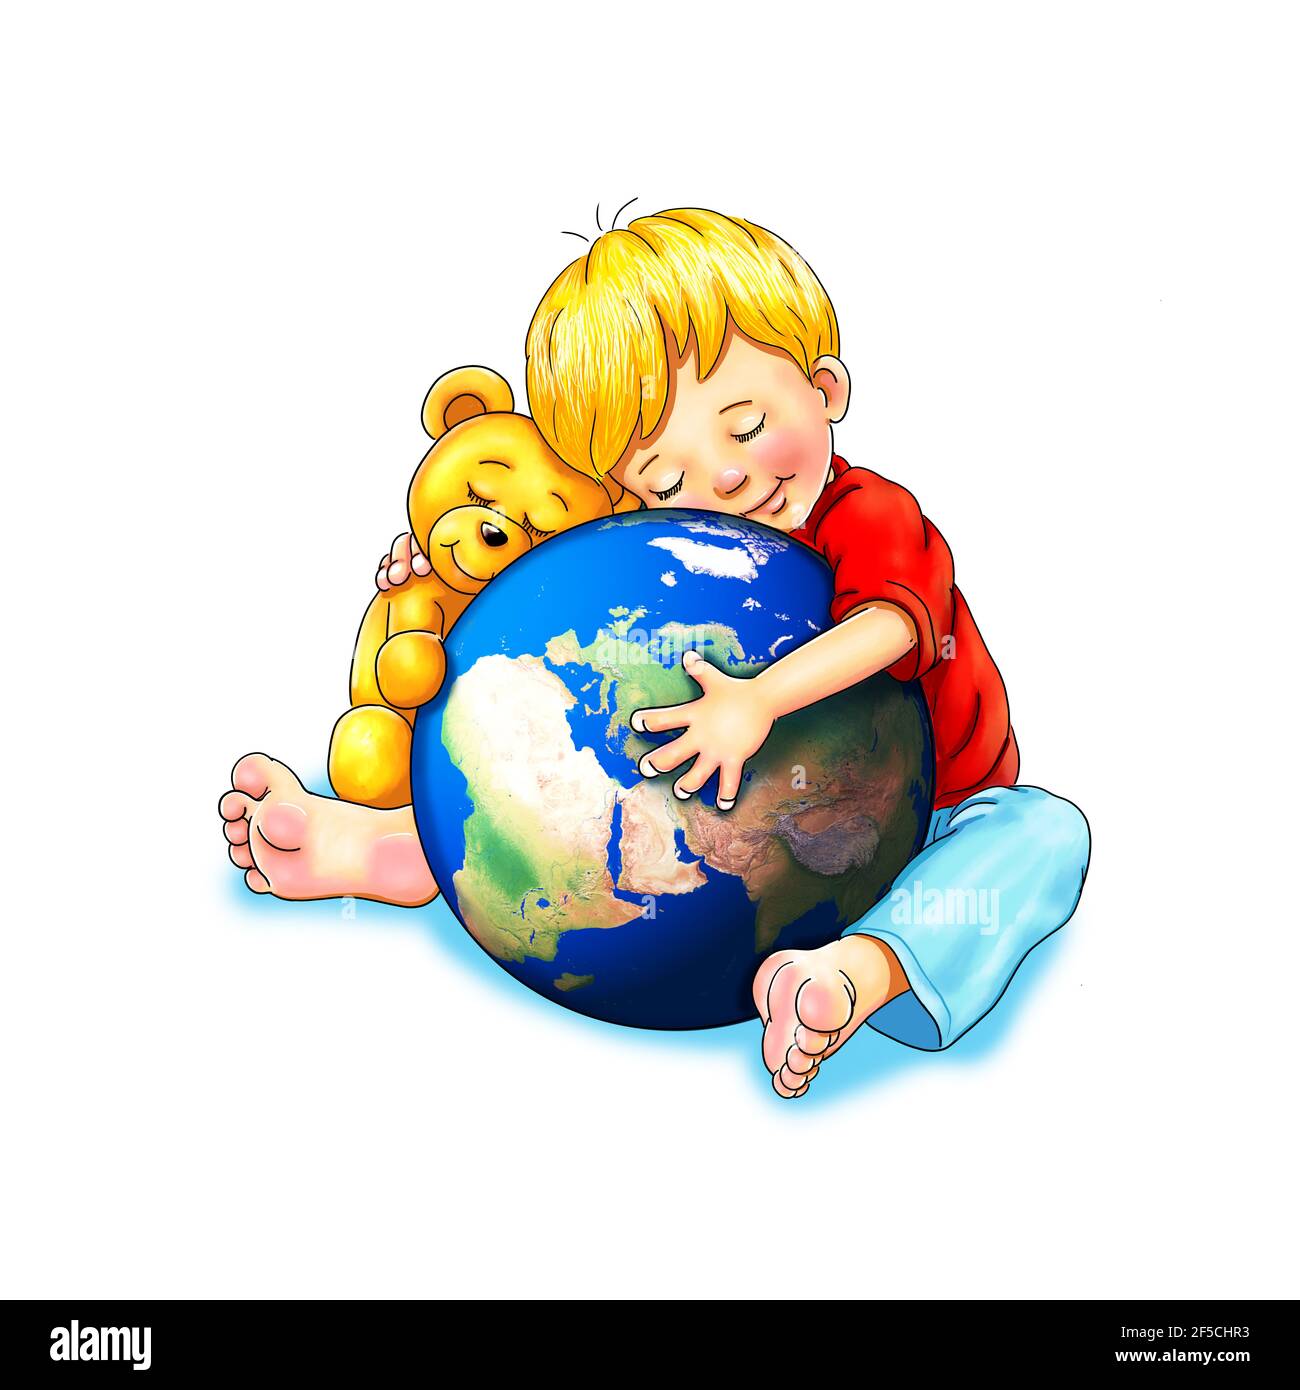 little cute boy sitting barefoot on the floor hugging the earth with his teddy toy lovingly the earth globe planet, new earth cute gentle devotion Stock Photo